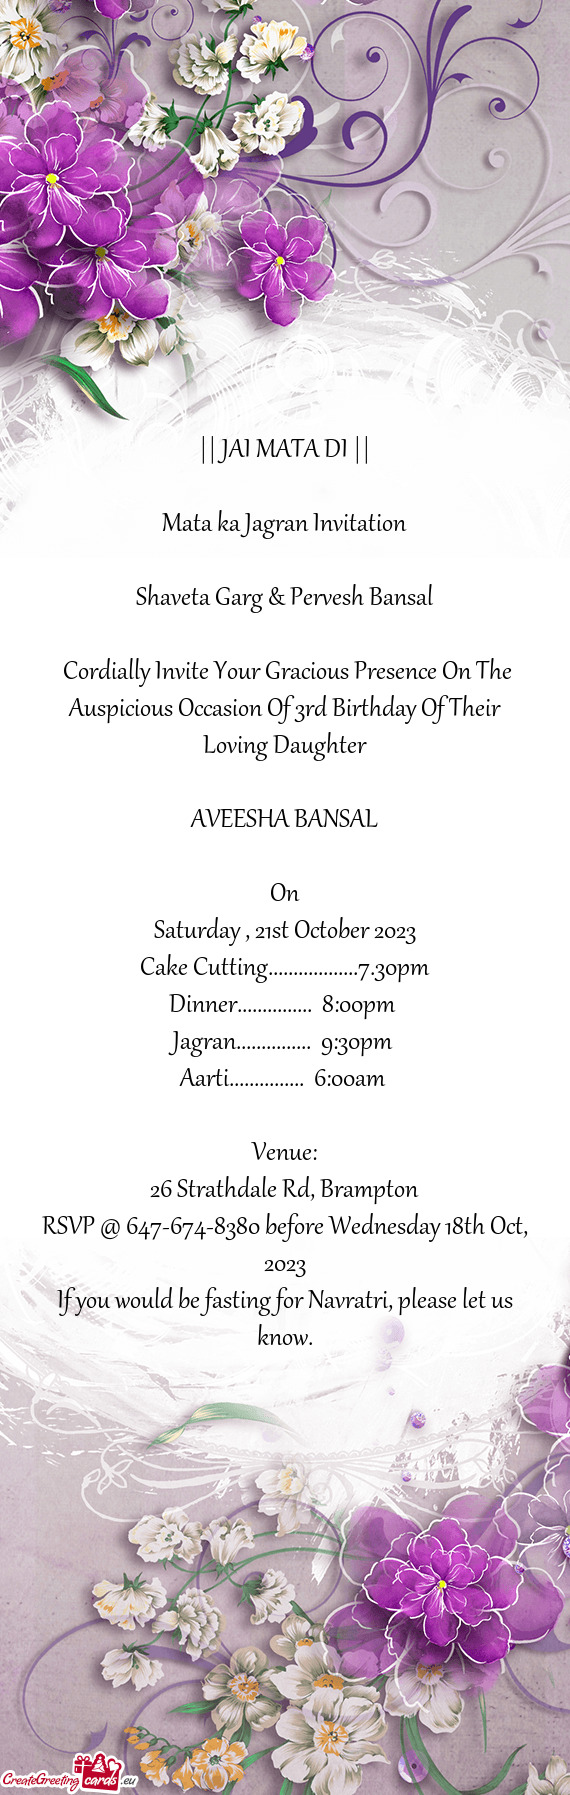 Cordially Invite Your Gracious Presence On The Auspicious Occasion Of 3rd Birthday Of Their Loving